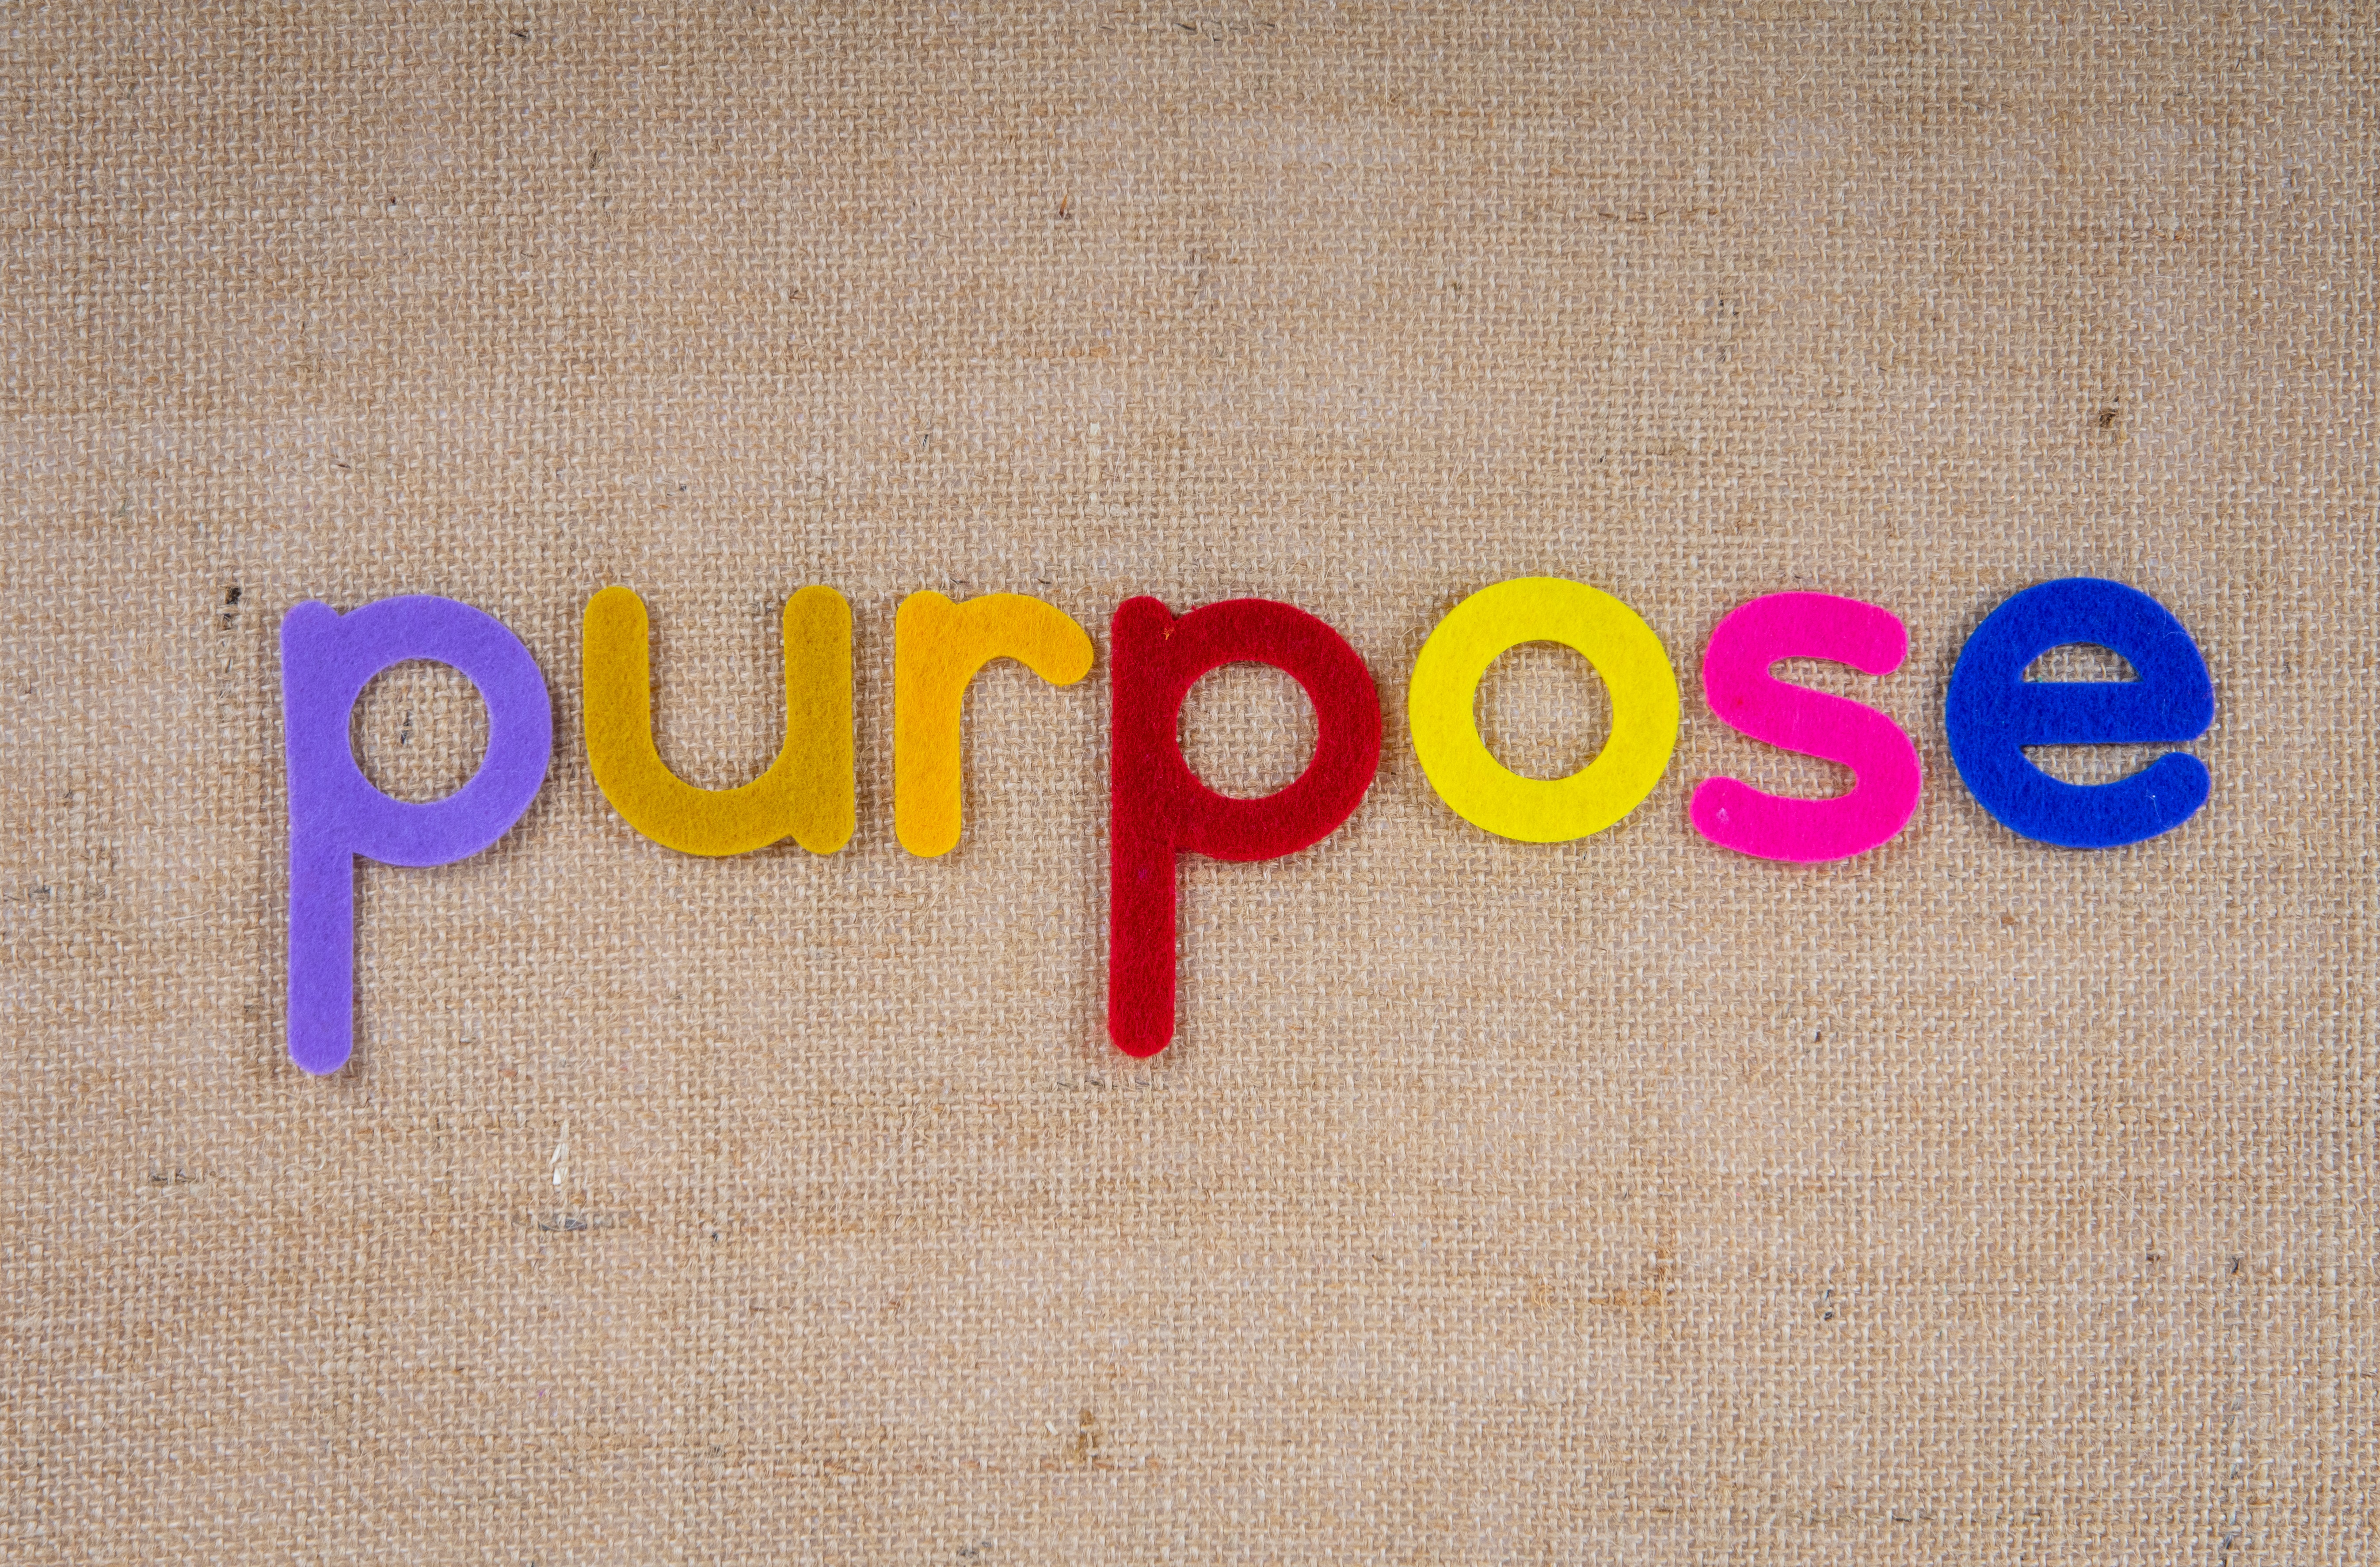 The word purpose in felt letters, each of a different color, against a beige background.